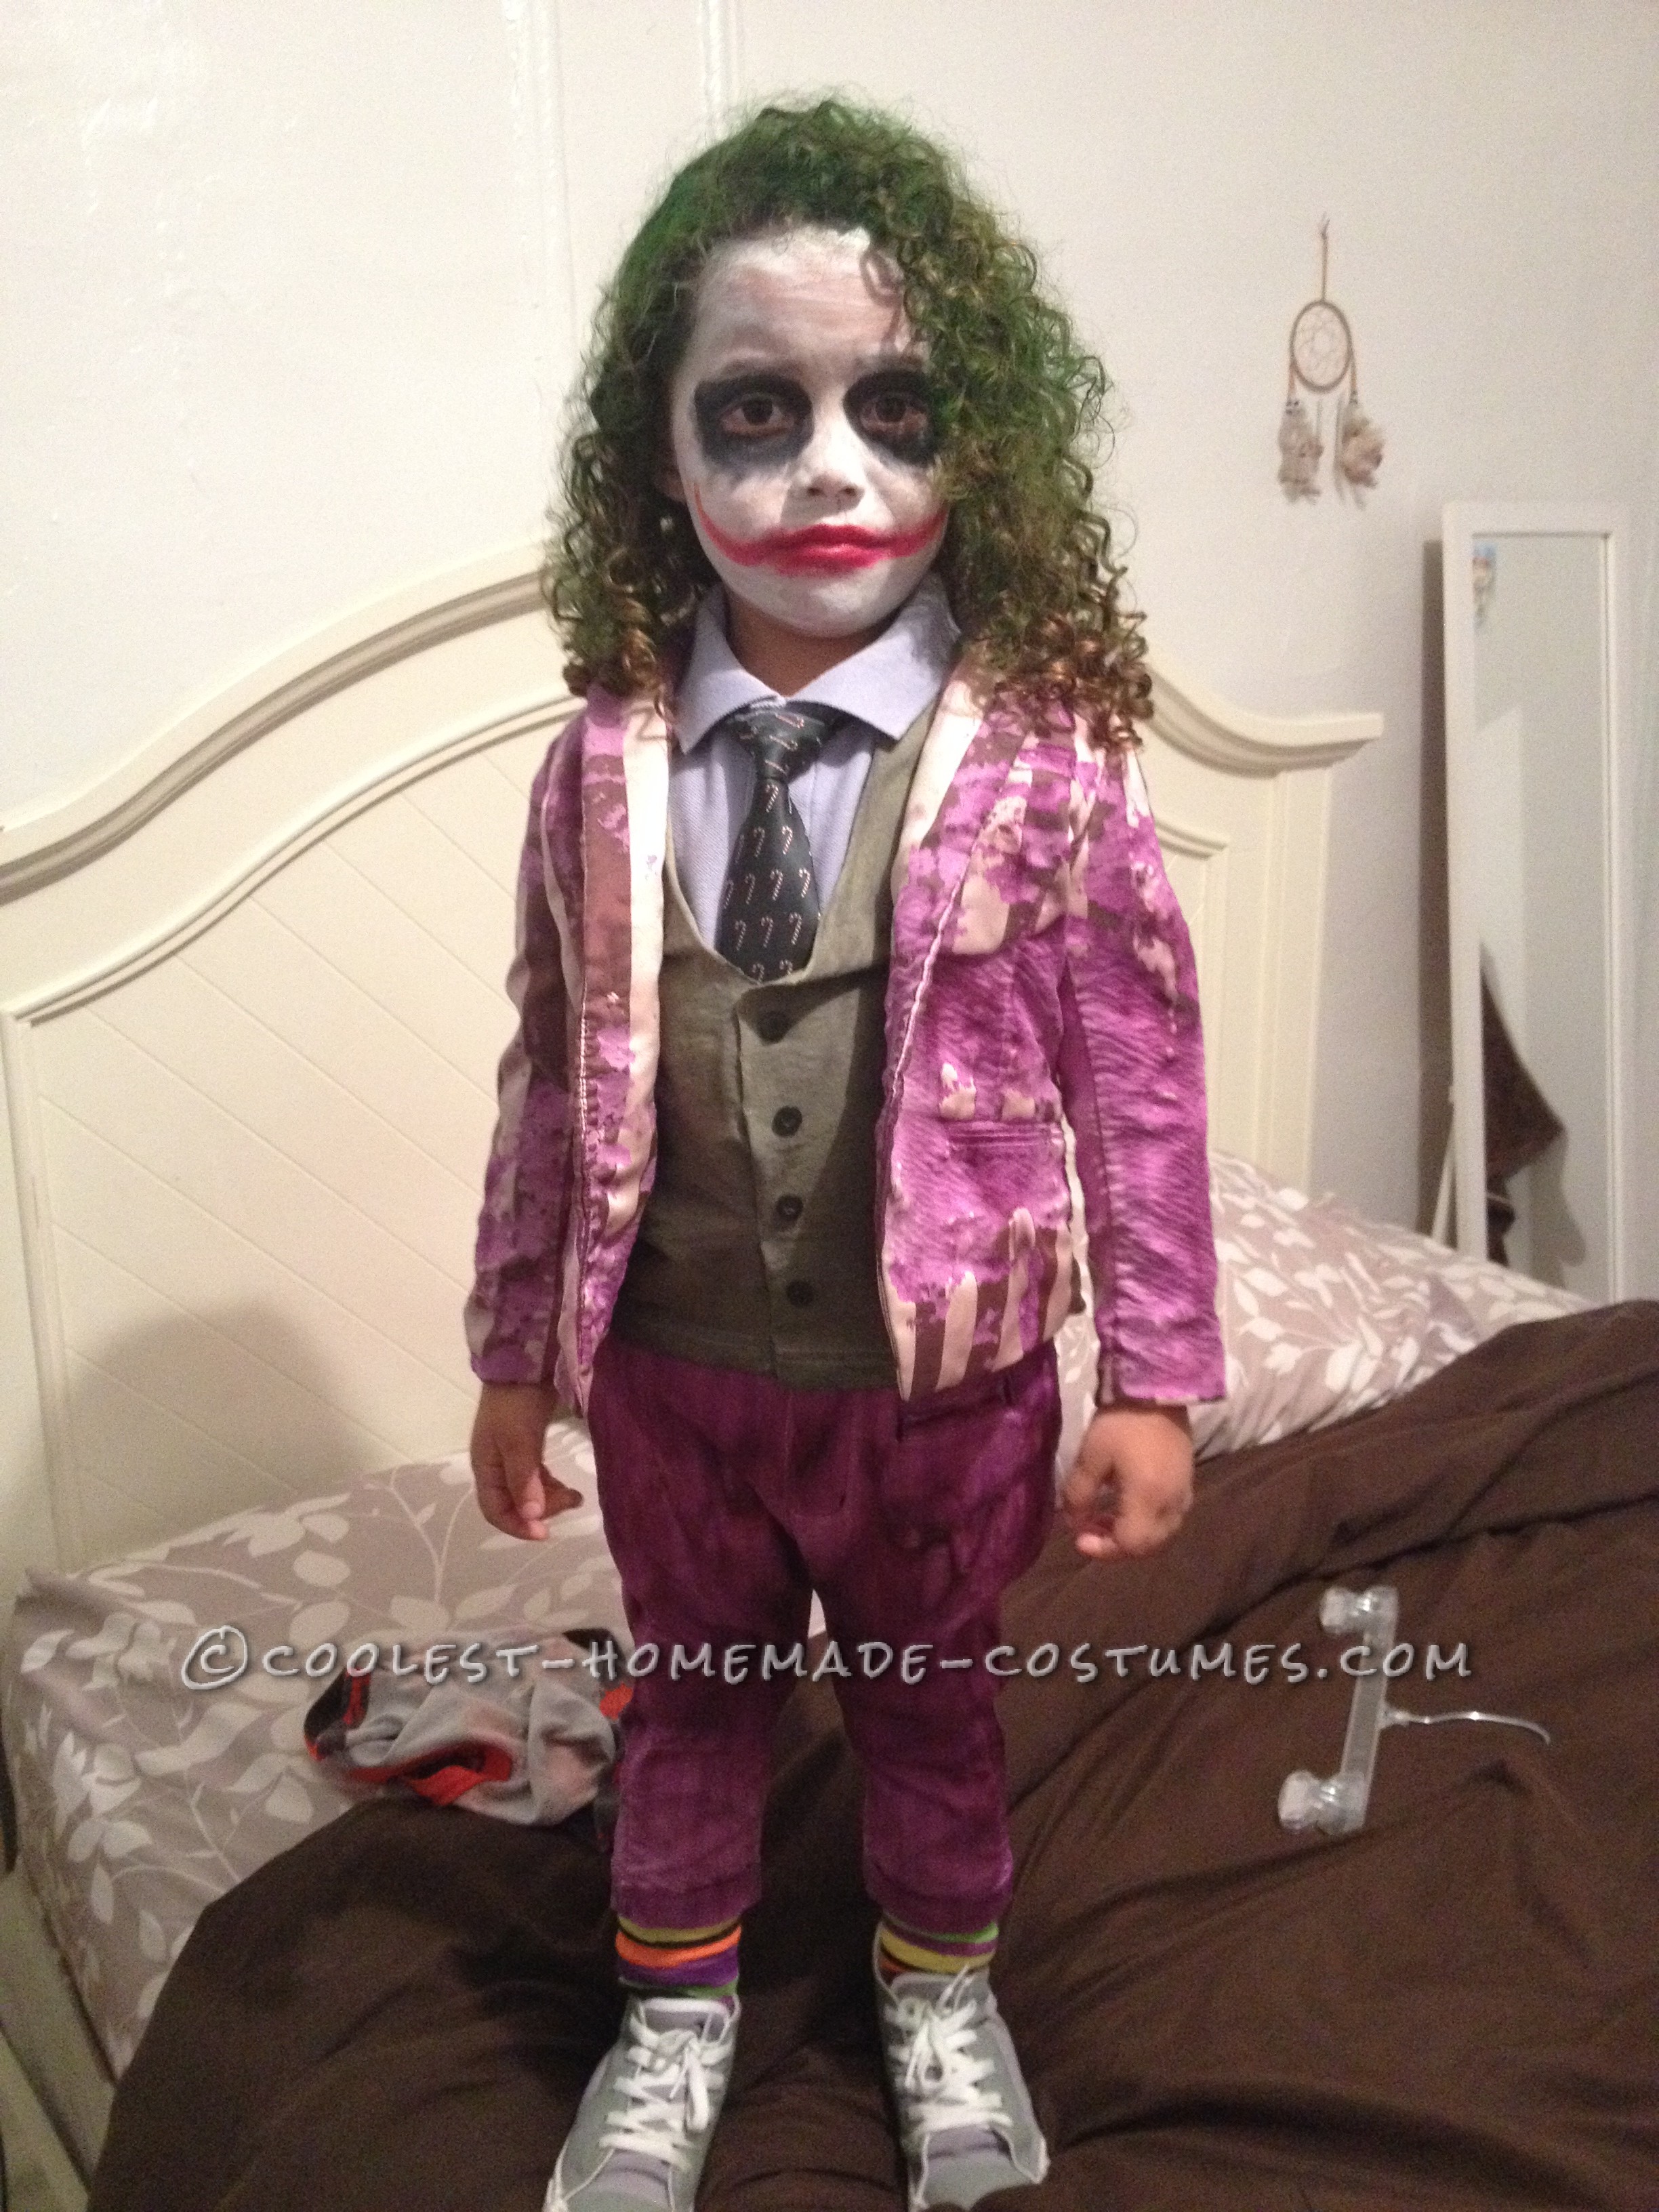 Wetland Ib Hysterisk morsom Creative and Unique Homemade Joker Costume for a Toddler